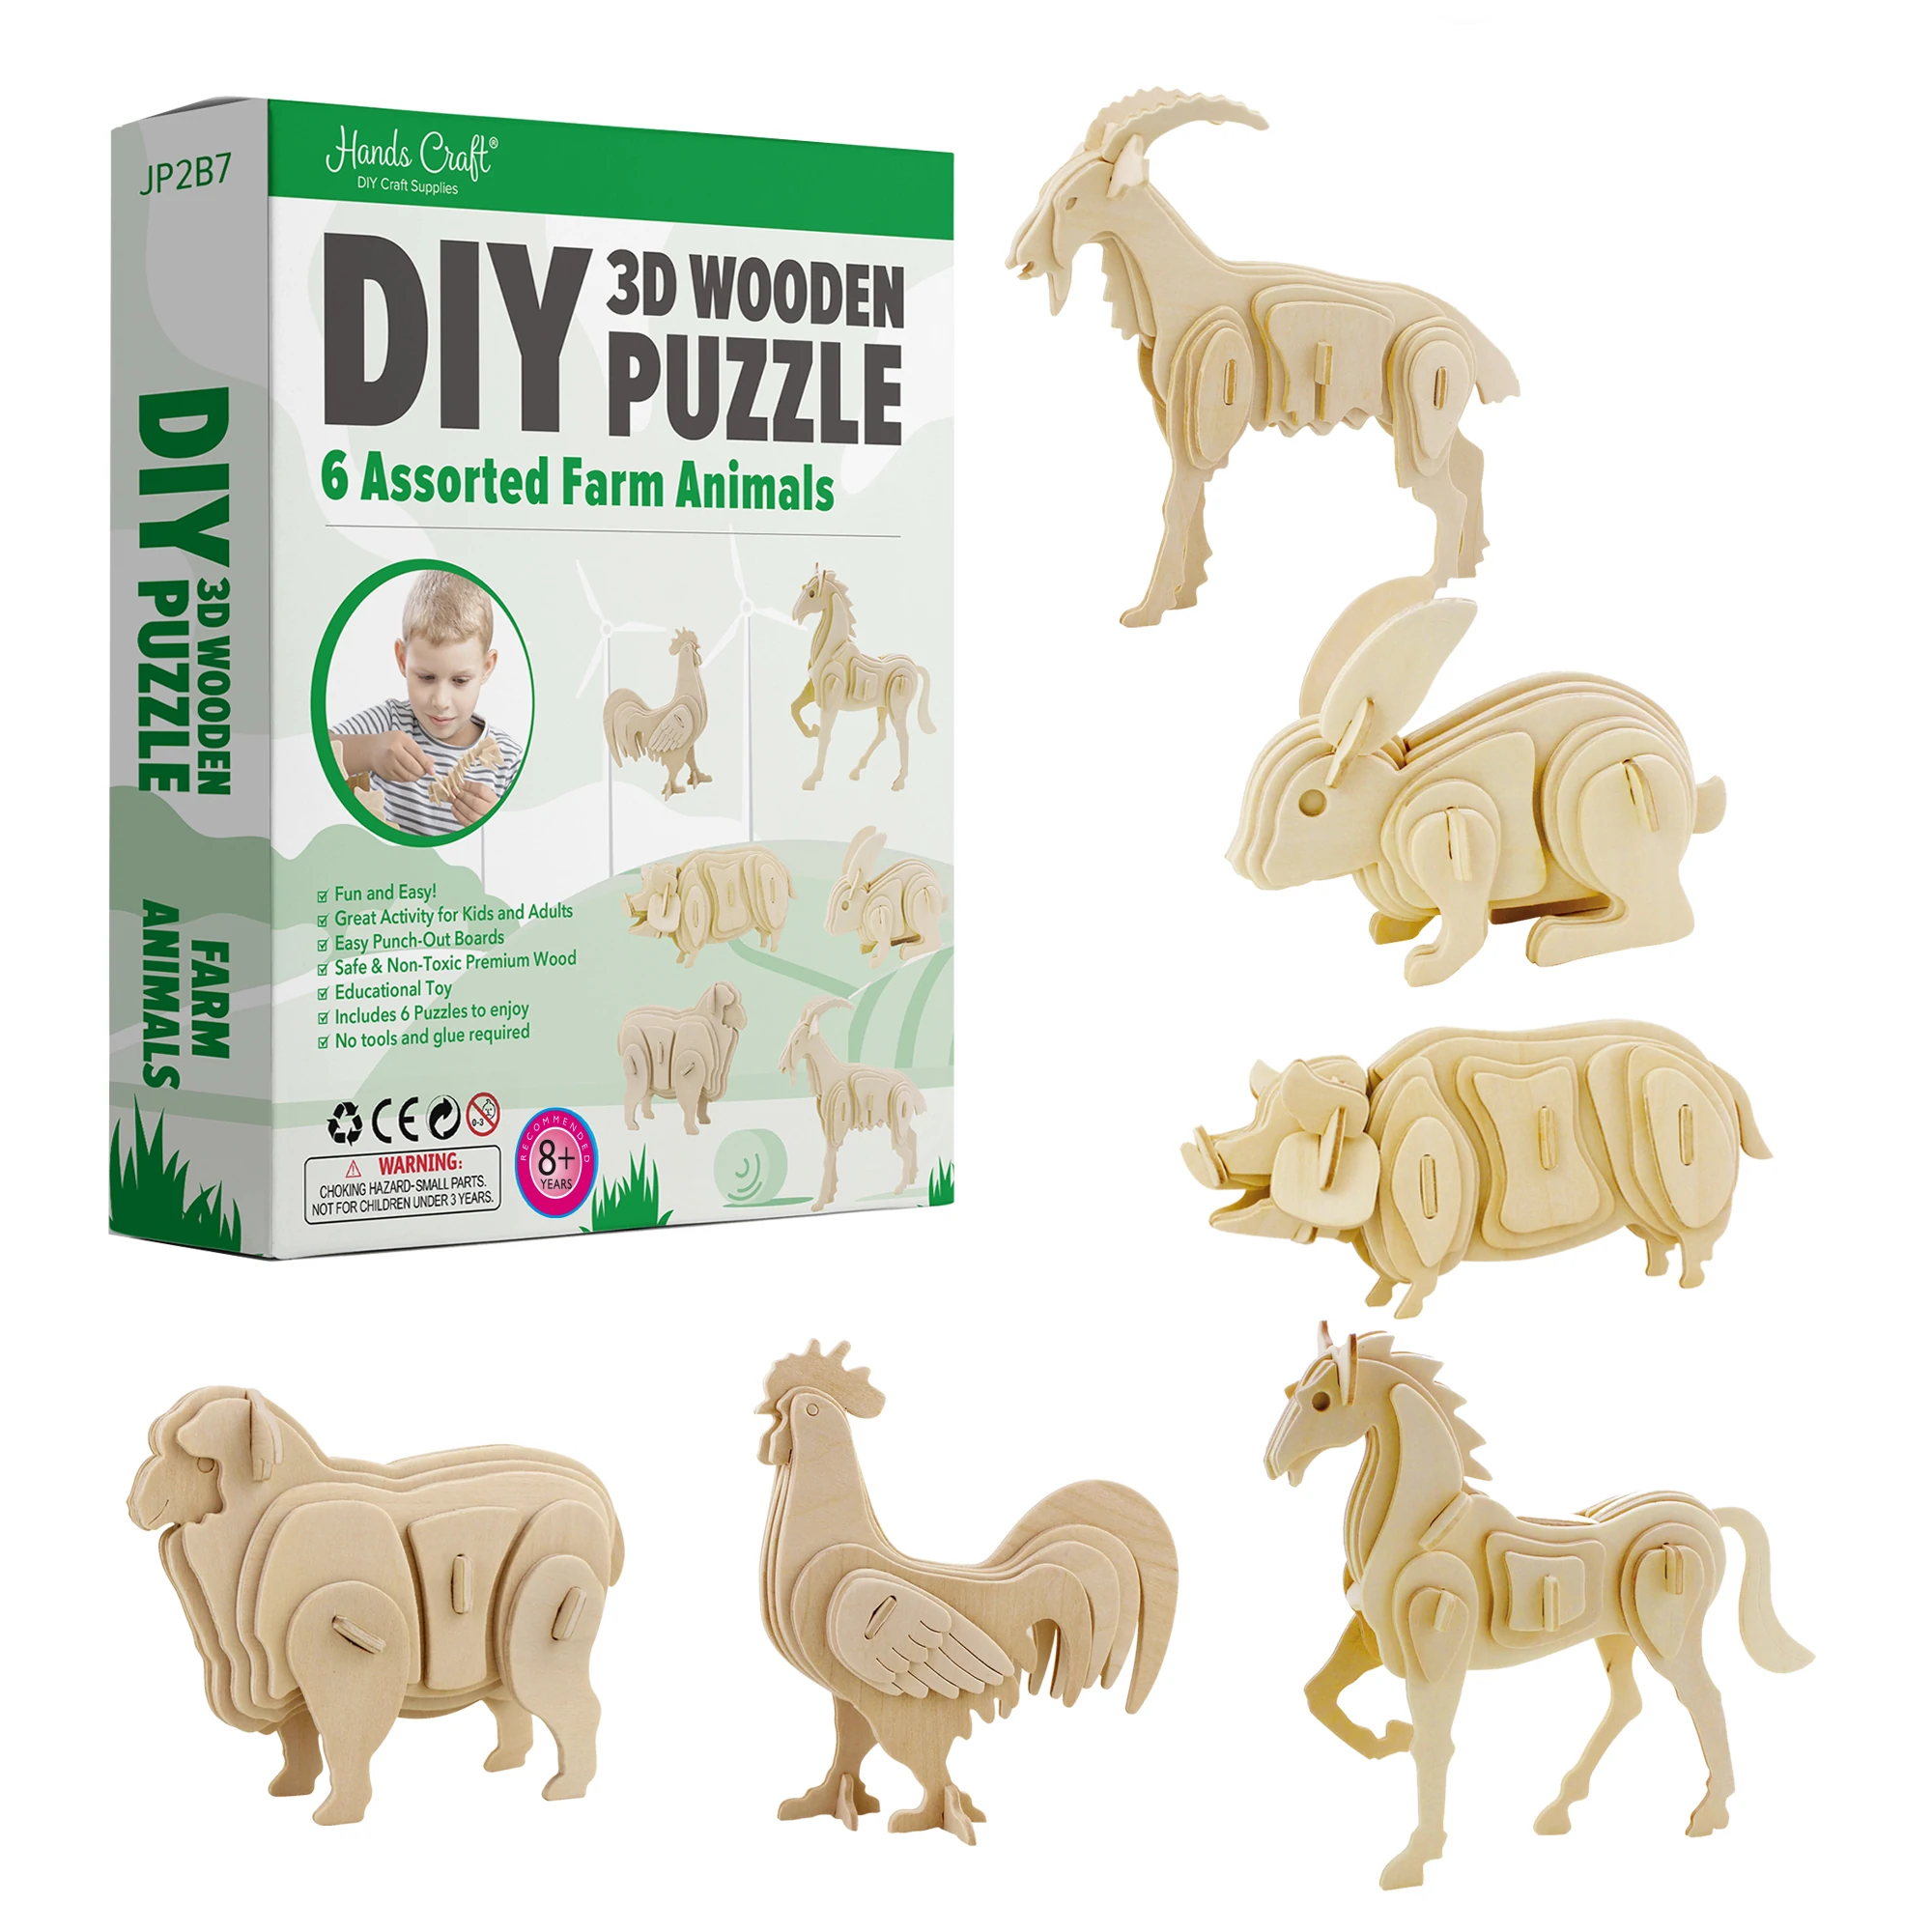 DIY 3D Wooden Puzzle 6 Farm Animals by Hands Craft